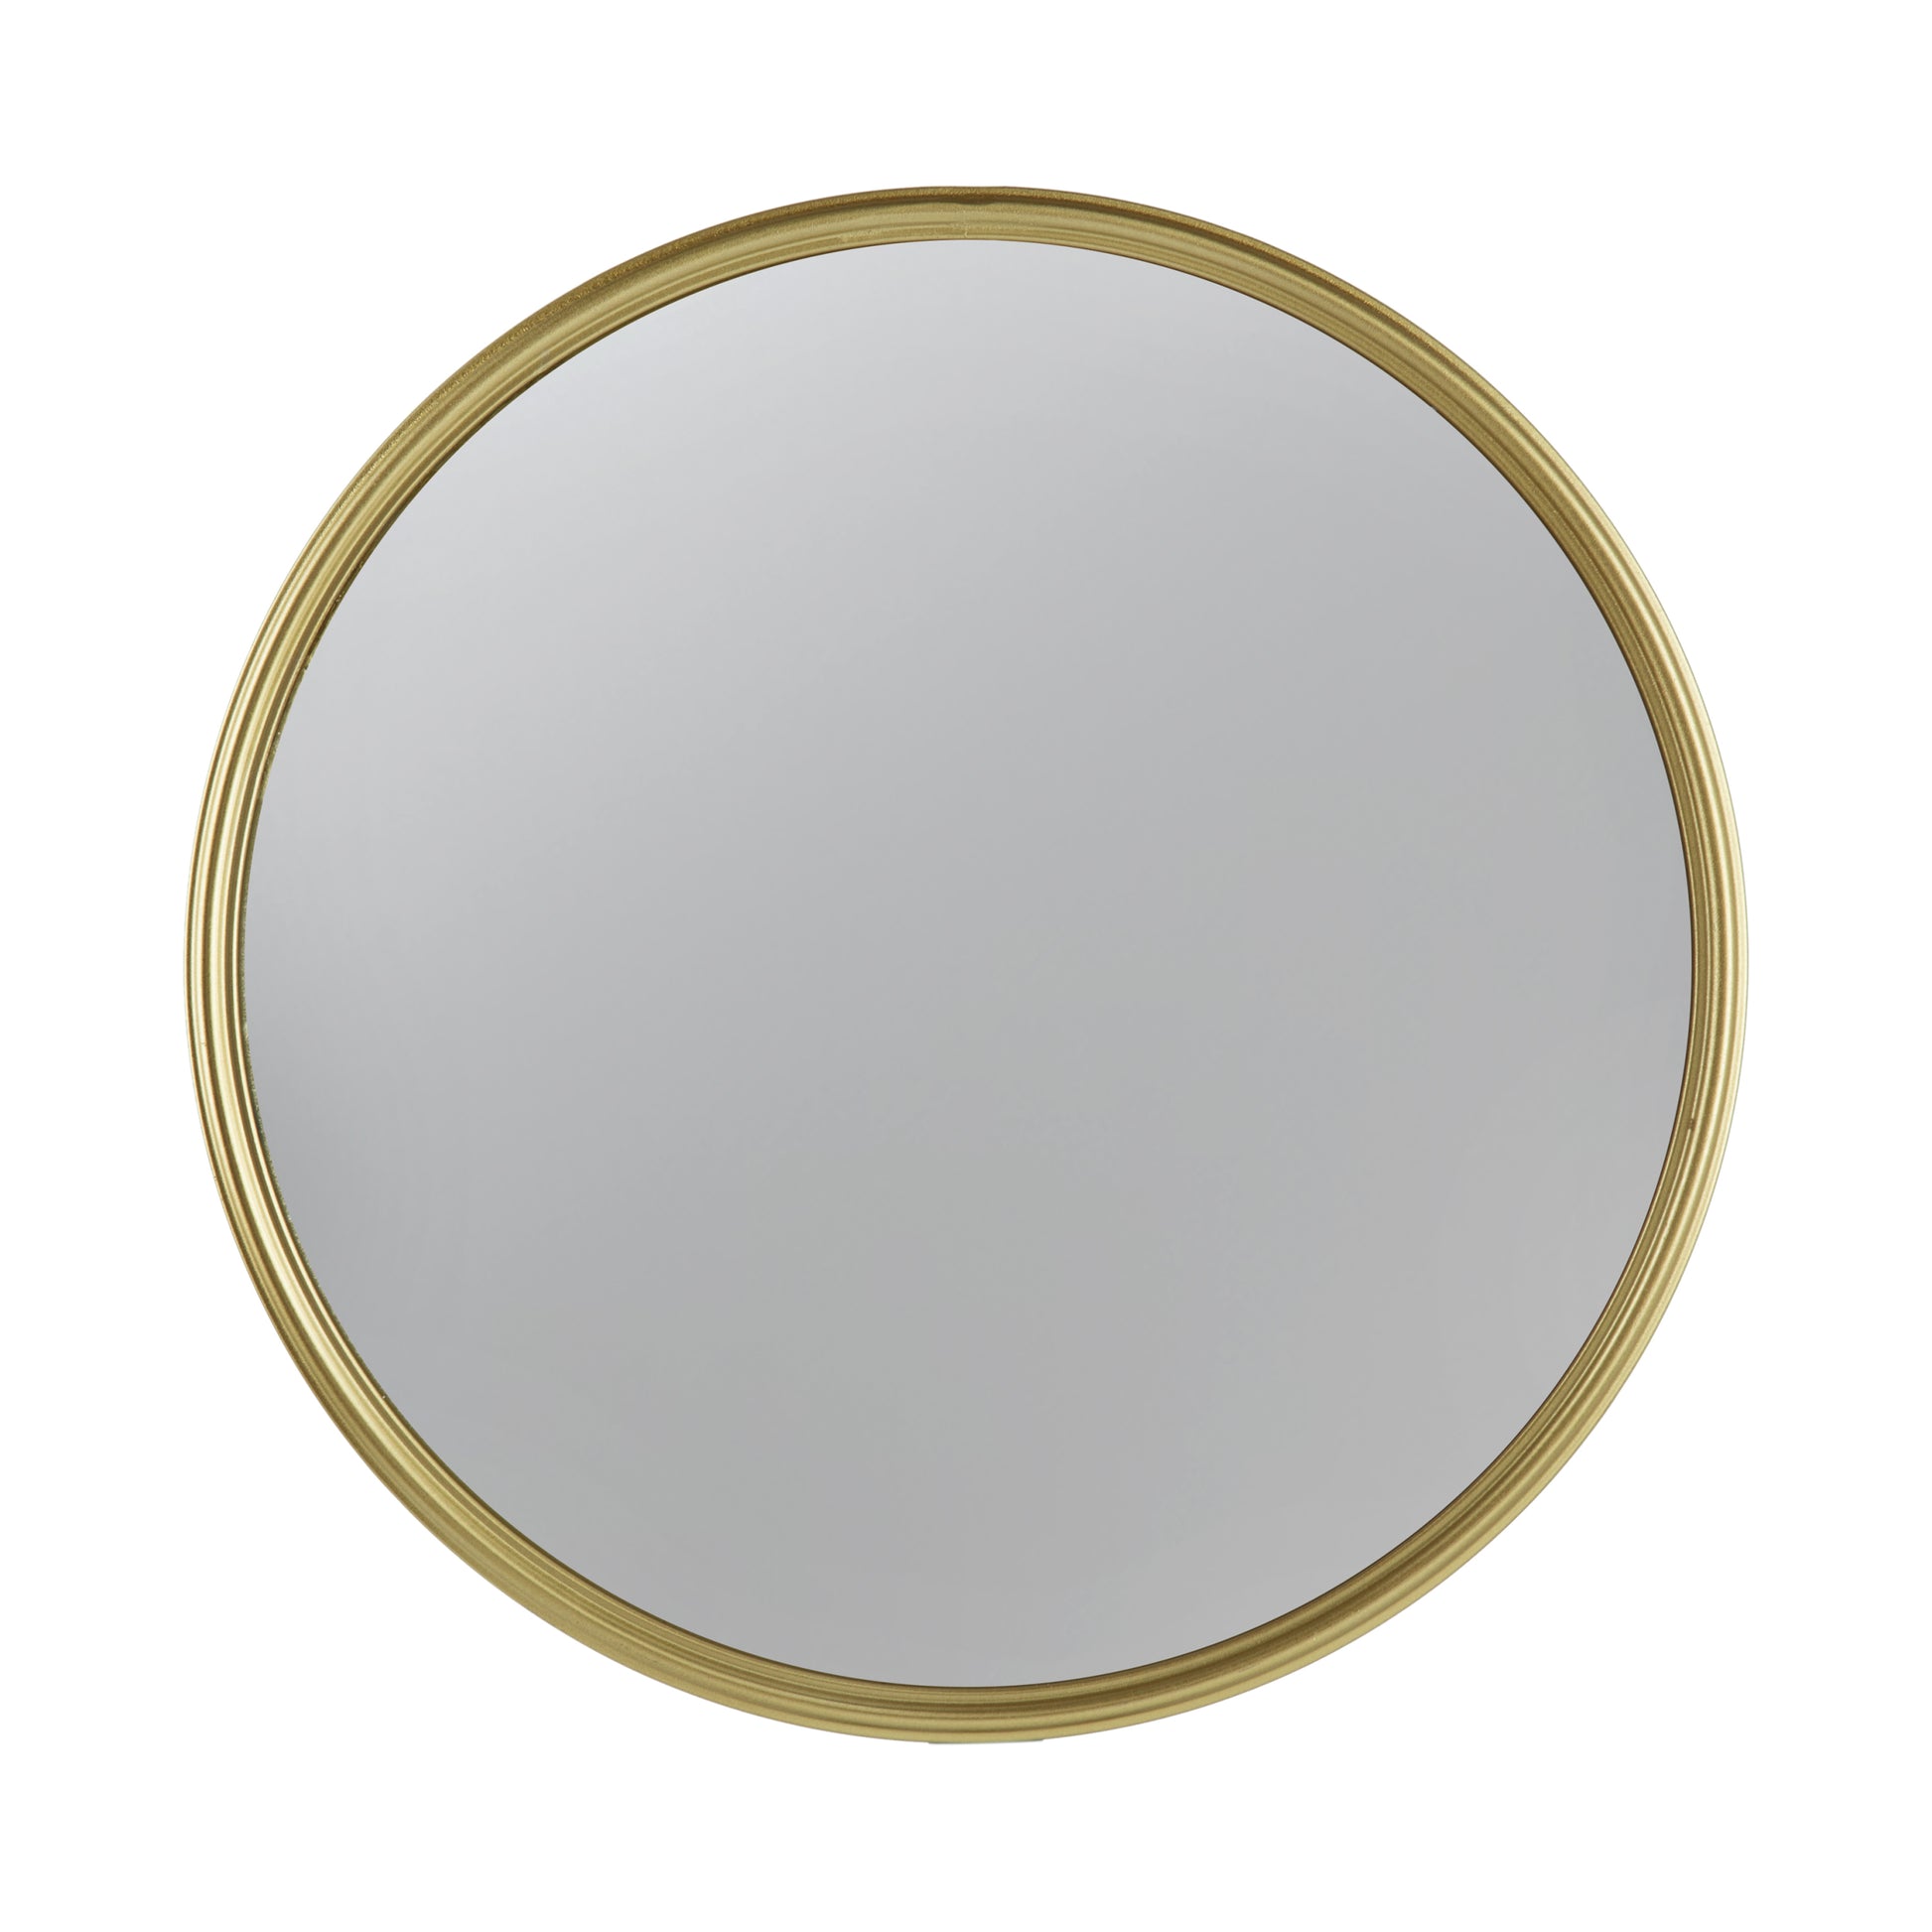 D11" Gold Round Mirror, Circle Mirror with Iron Frame gold-metal & wood